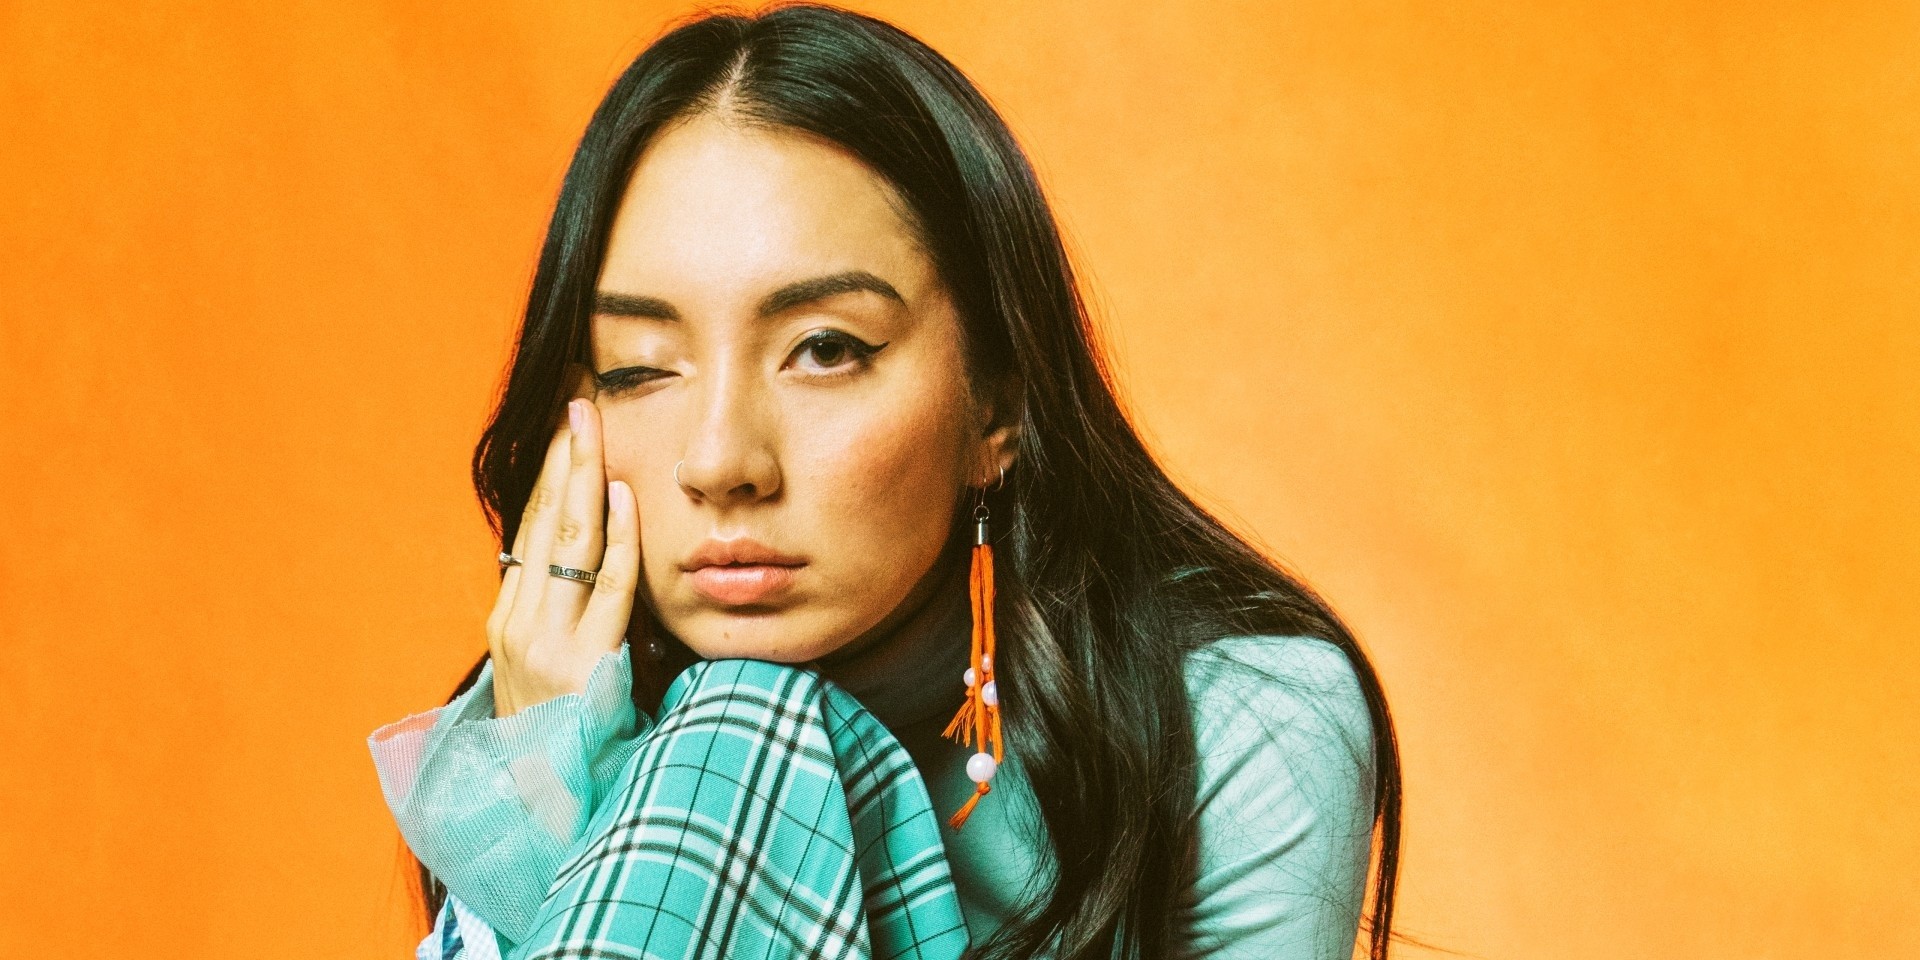 "Being a successful indie musician takes so much more than music": Jaguar Jonze gets real about her calling